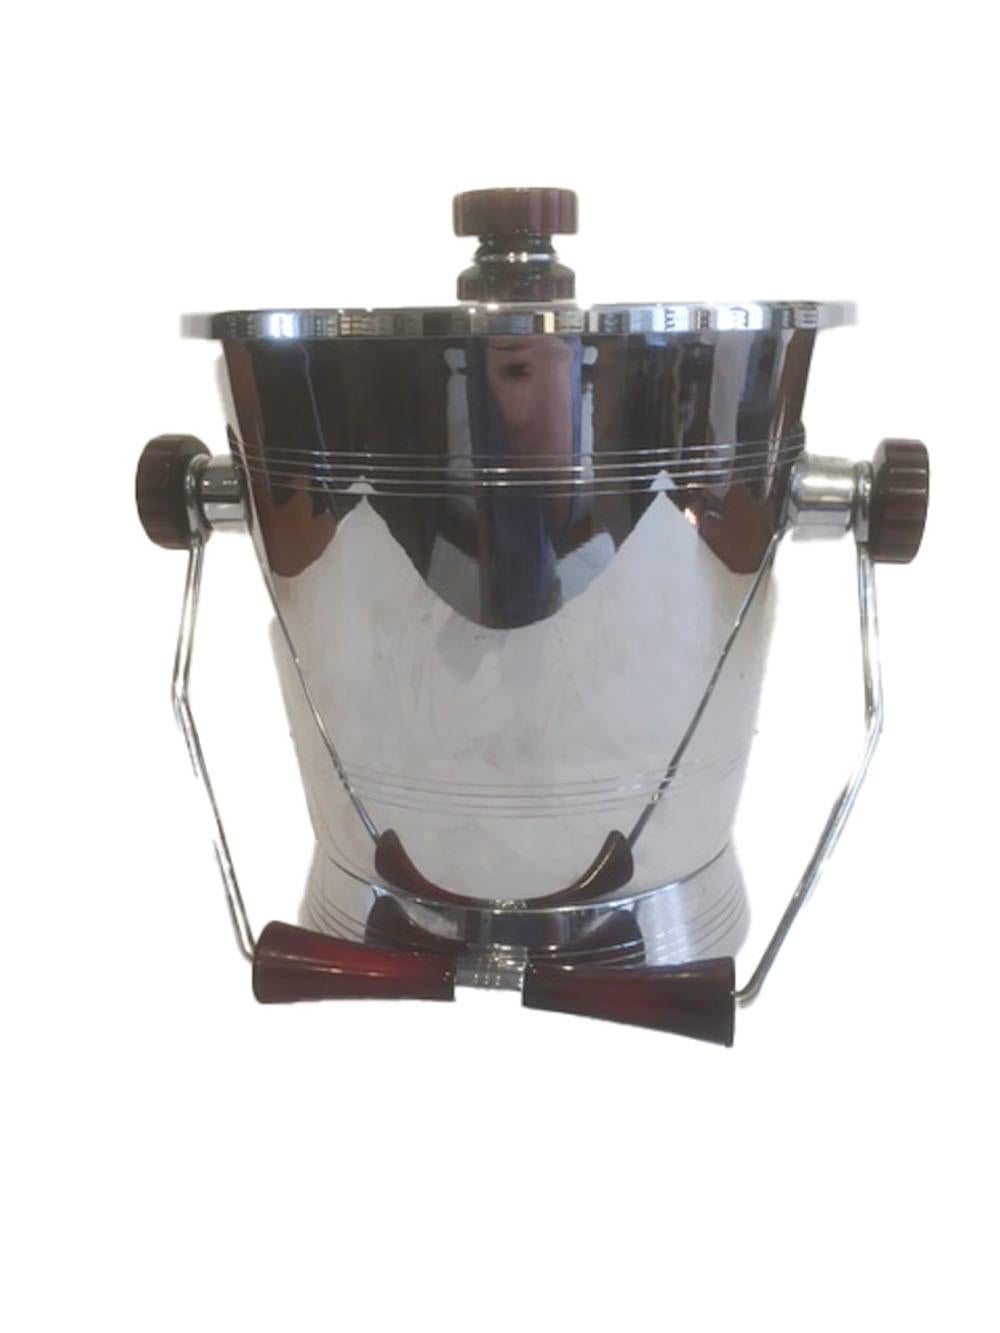 Mid twentieth century chrome plated ice bucket with red Bakelite handles and knobs along with a pair of ice tongs with Bakelite side panels. Made by Glo-Hill as part of their Barmates line.